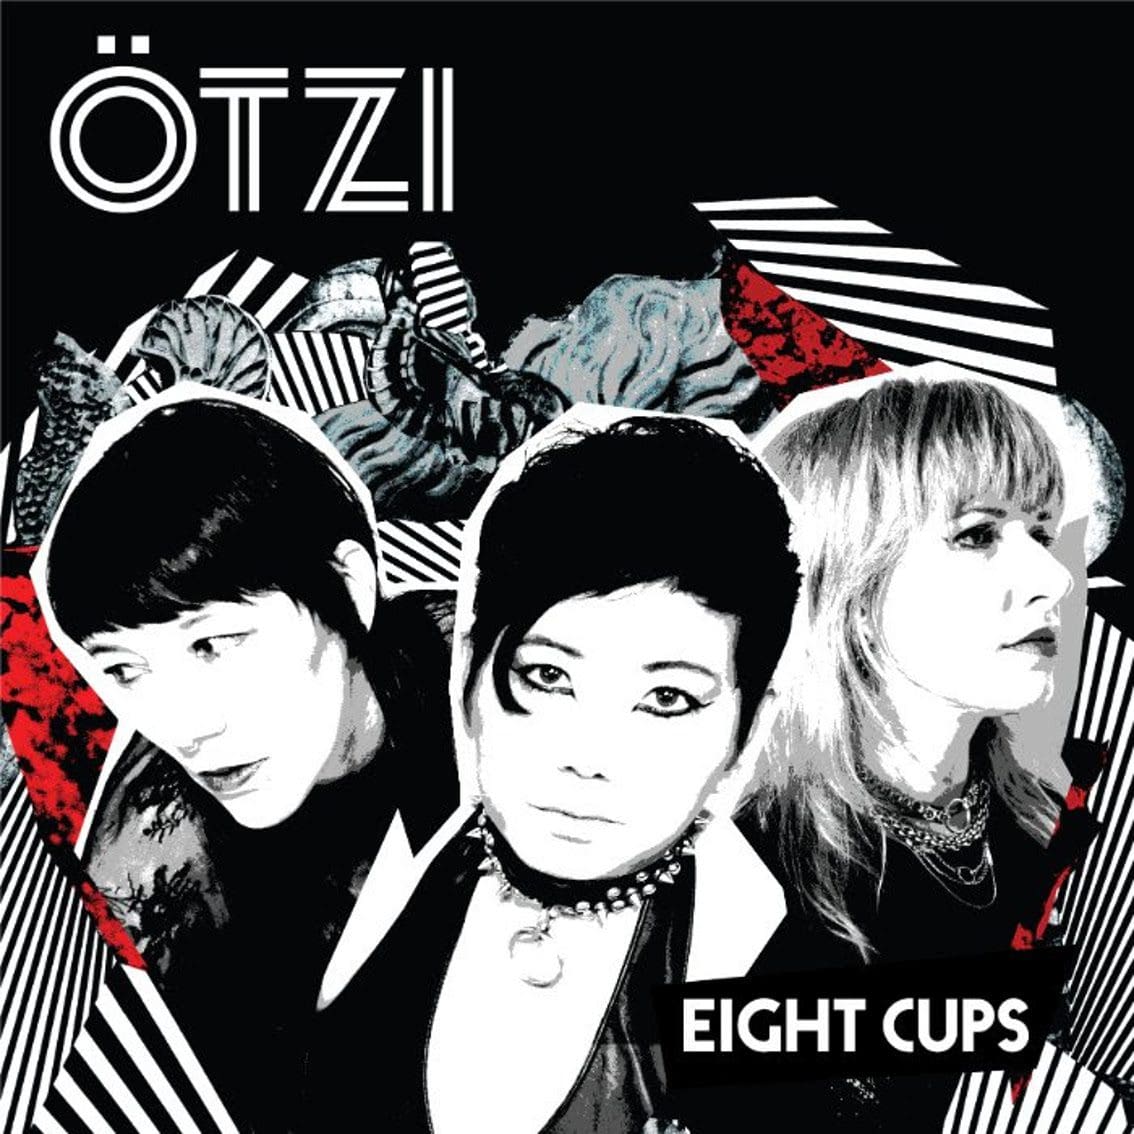 Post-punk group Ötzi reveals 3rd single 'Eight Cups' from upcoming Artoffact Records album 'Storm'